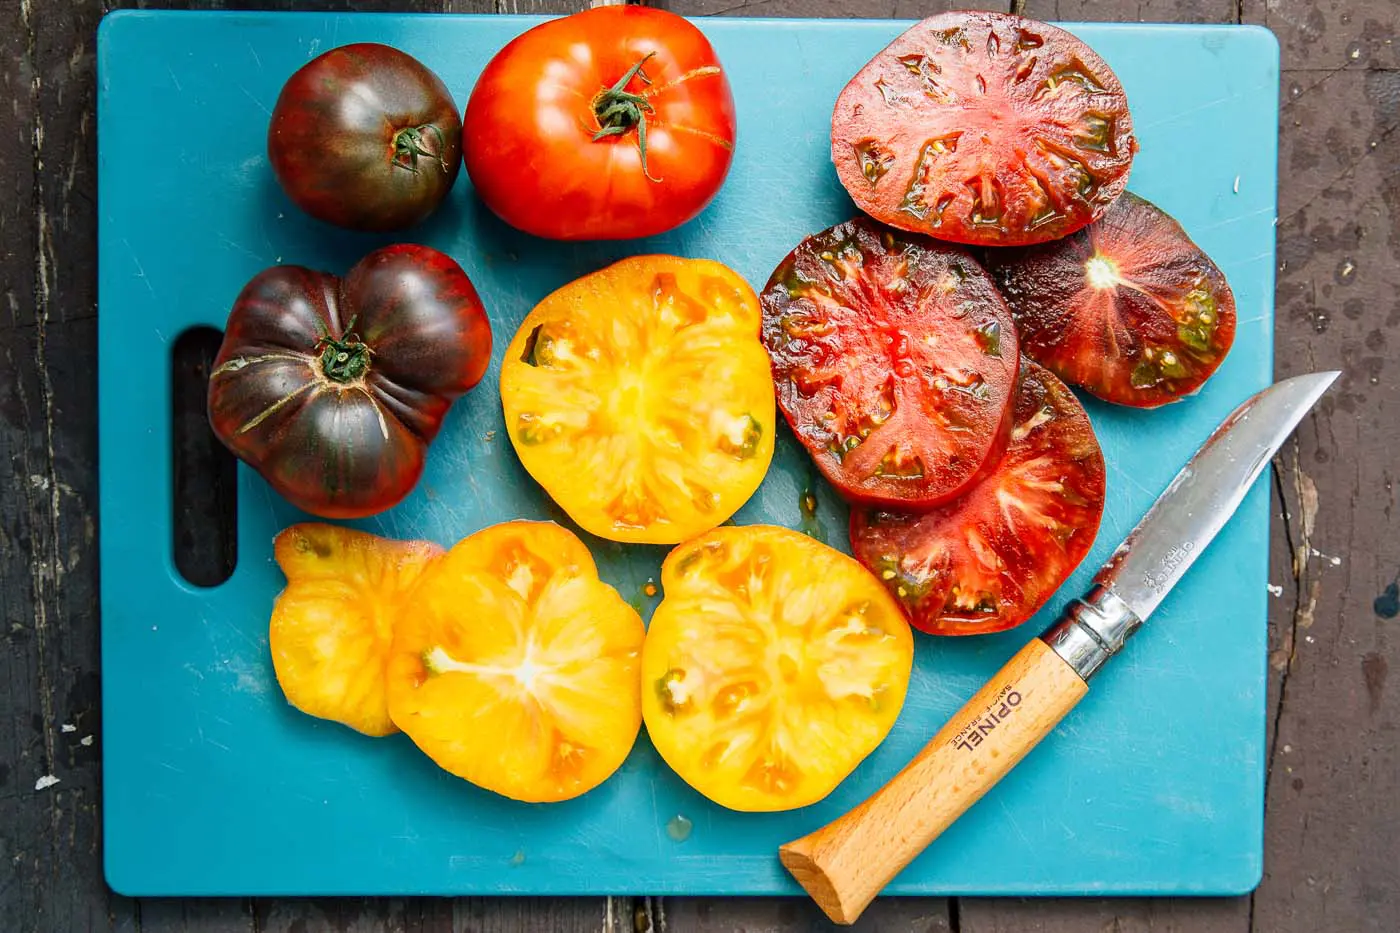 Red and yellow heirloom tomato slices on a blue cutting board